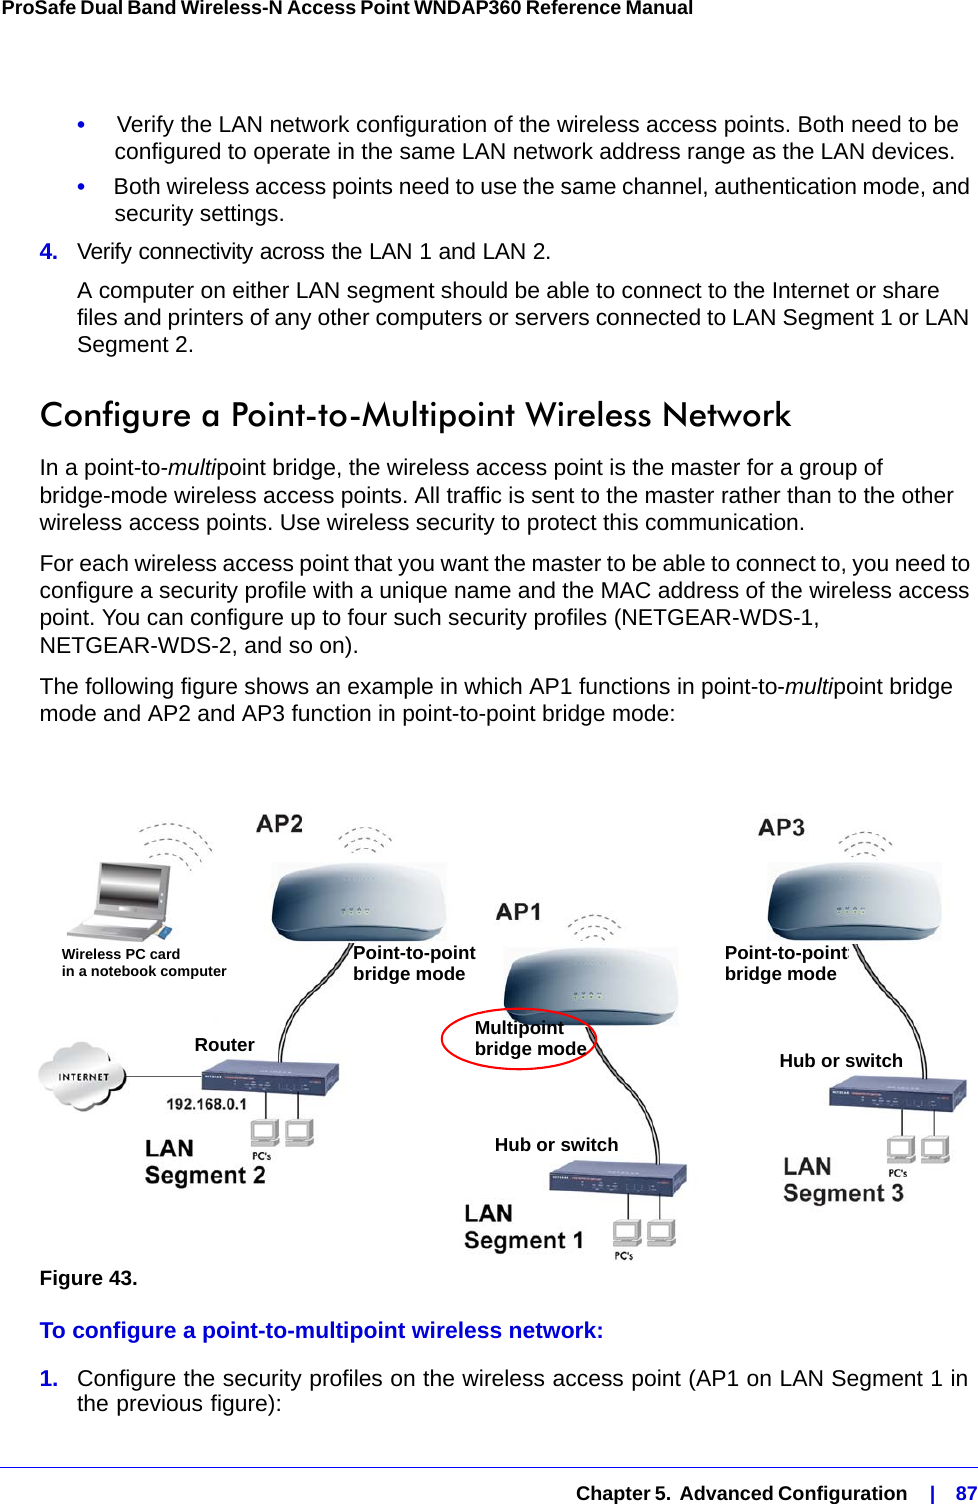   Chapter 5.  Advanced Configuration    |    87ProSafe Dual Band Wireless-N Access Point WNDAP360 Reference Manual •     Verify the LAN network configuration of the wireless access points. Both need to be configured to operate in the same LAN network address range as the LAN devices.•     Both wireless access points need to use the same channel, authentication mode, and security settings.4.  Verify connectivity across the LAN 1 and LAN 2. A computer on either LAN segment should be able to connect to the Internet or share files and printers of any other computers or servers connected to LAN Segment 1 or LAN Segment 2.Configure a Point-to-Multipoint Wireless NetworkIn a point-to-multipoint bridge, the wireless access point is the master for a group of bridge-mode wireless access points. All traffic is sent to the master rather than to the other wireless access points. Use wireless security to protect this communication.For each wireless access point that you want the master to be able to connect to, you need to configure a security profile with a unique name and the MAC address of the wireless access point. You can configure up to four such security profiles (NETGEAR-WDS-1, NETGEAR-WDS-2, and so on).The following figure shows an example in which AP1 functions in point-to-multipoint bridge mode and AP2 and AP3 function in point-to-point bridge mode:Figure 43. To configure a point-to-multipoint wireless network:1.  Configure the security profiles on the wireless access point (AP1 on LAN Segment 1 in the previous figure):Wireless PC cardin a notebook computer Point-to-pointbridge modeMultipointbridge modePoint-to-pointbridge modeRouter Hub or switchHub or switch